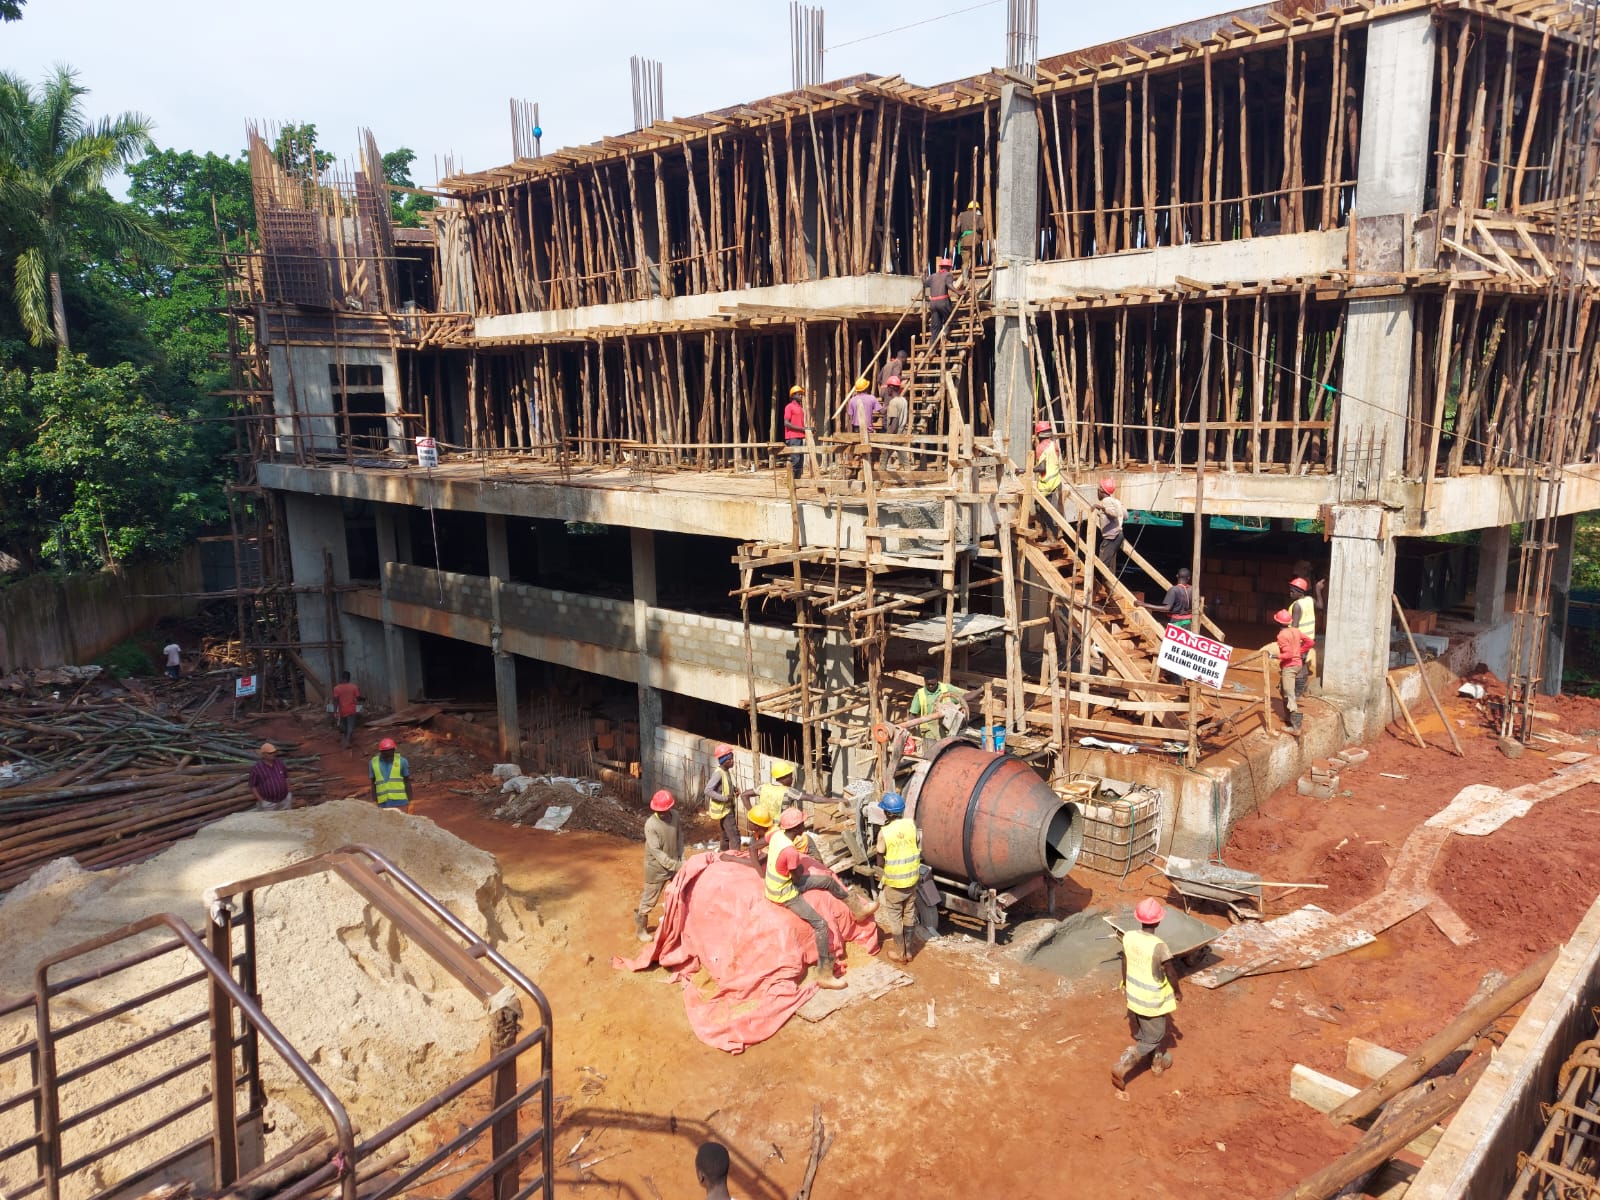 Top Factory Construction Company in Uganda: Who's the Best?